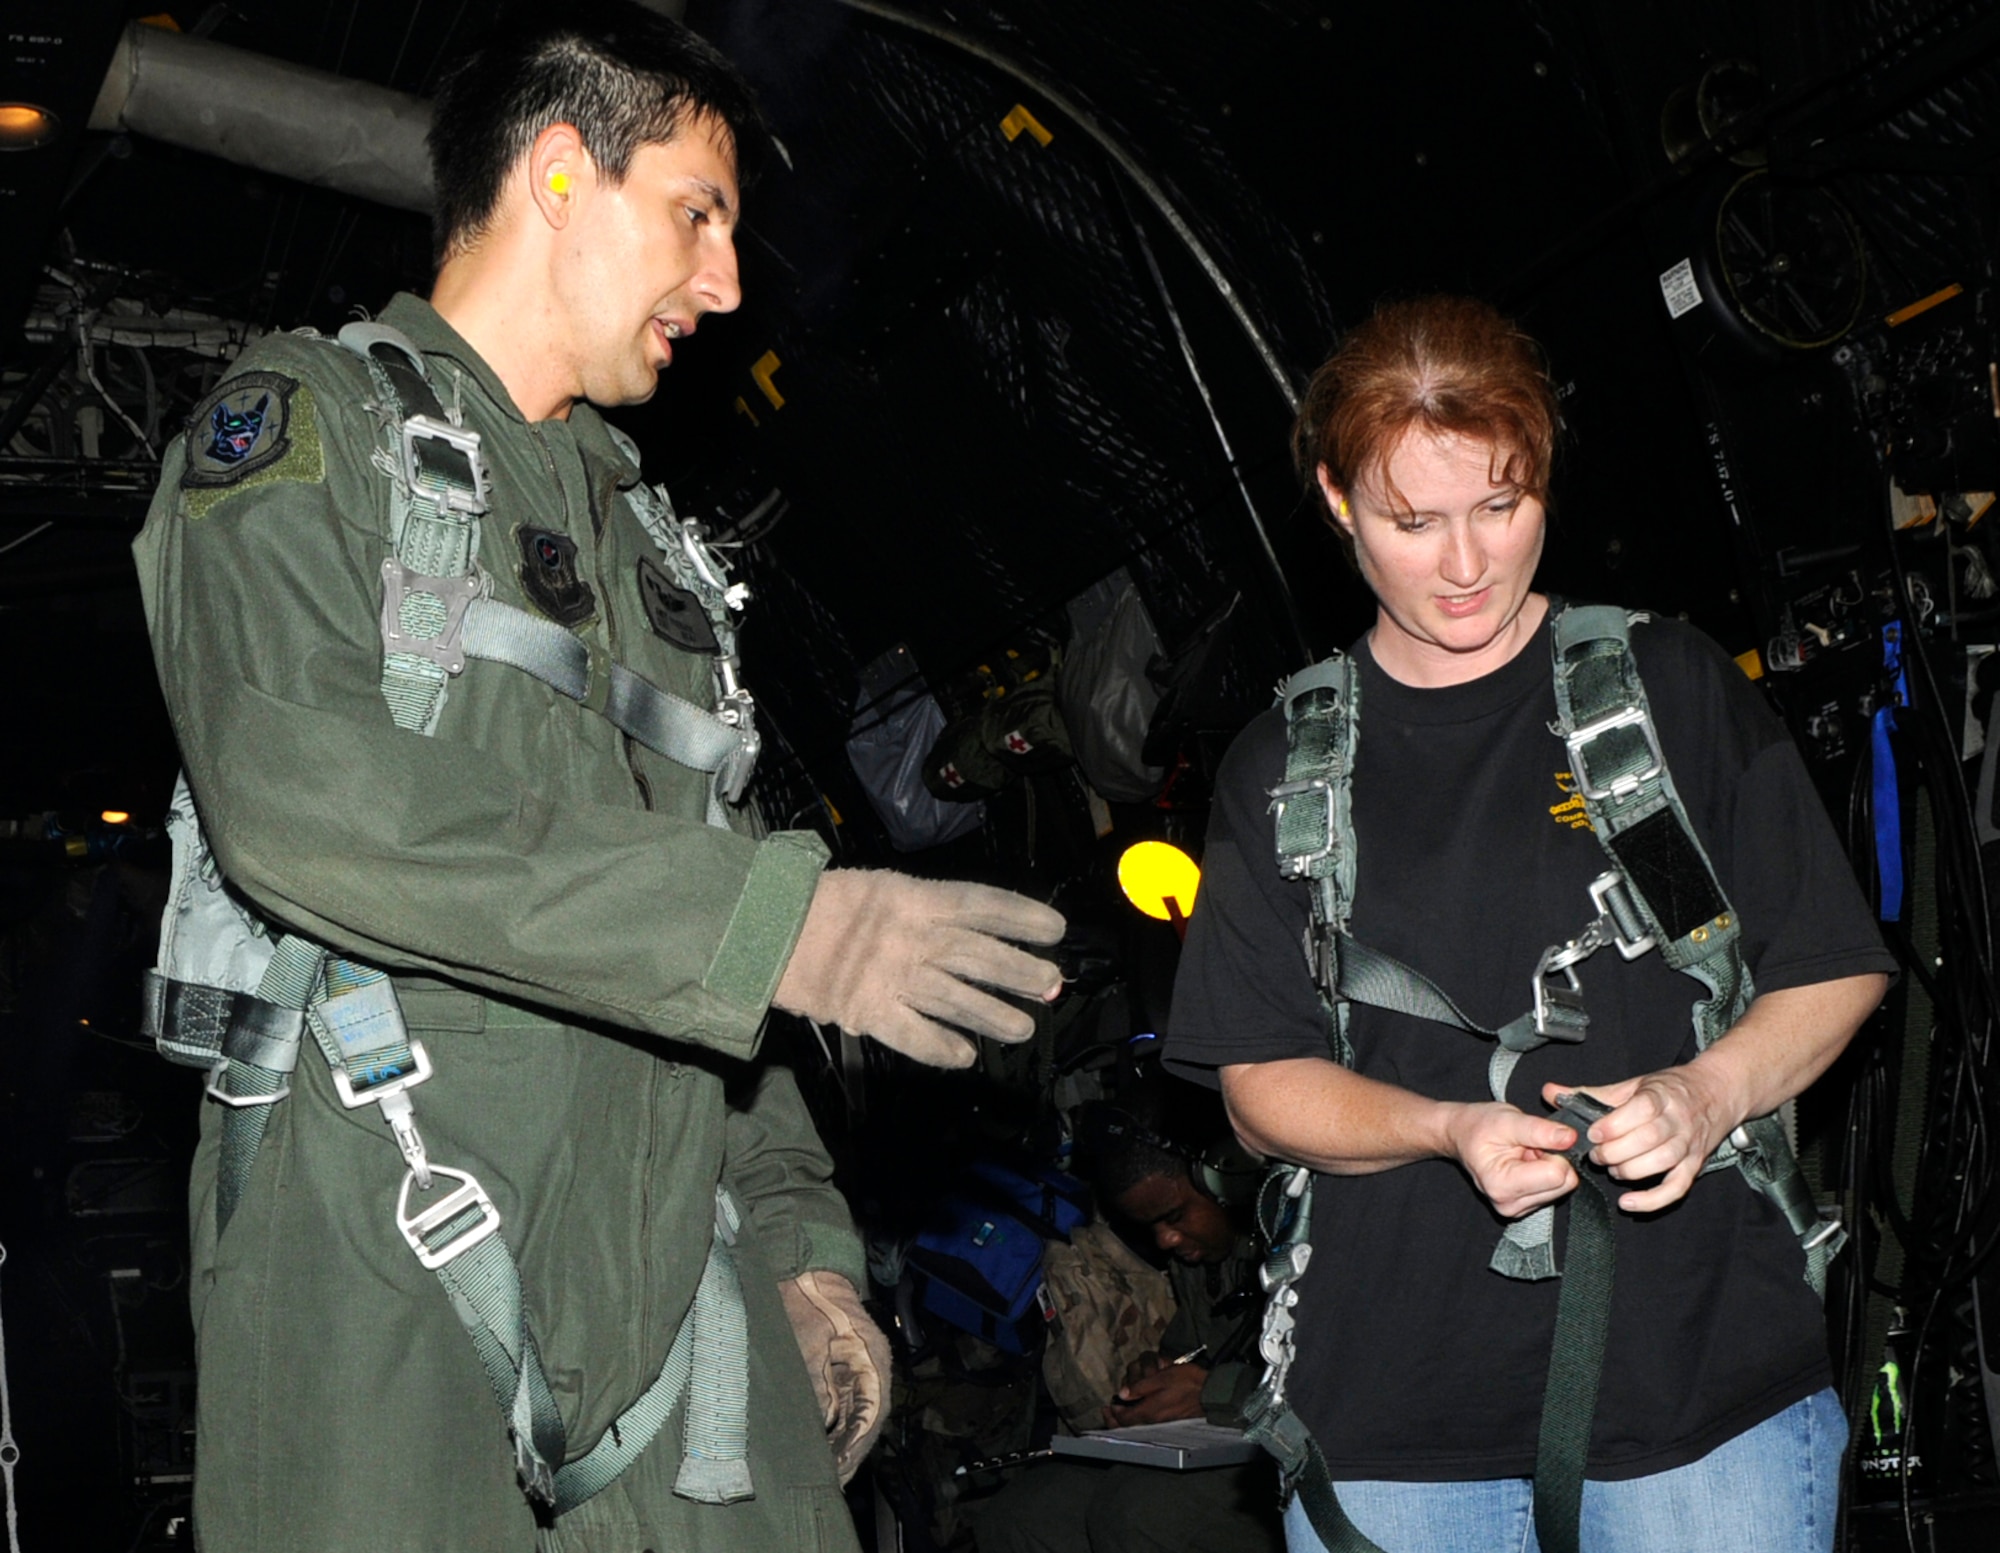 KADENA AIR BASE, Japan -- Staff Sgt. Andy Strause, a 17th Special Operations Squadron loadmaster, instructs Tina Anderson on how to properly wear a harness in the back of a MC-130P Combat Shadow here May 7 during a spouse orientation flight. Spouses from the 353rd Special Operations Group were treated to a small capabilities brief, a tour of the 320th Special Tactics Squadron and their equipment and orientation flights during a spouse orientation day. (U.S. Air Force photo by Tech. Sgt. Chrissy Best)